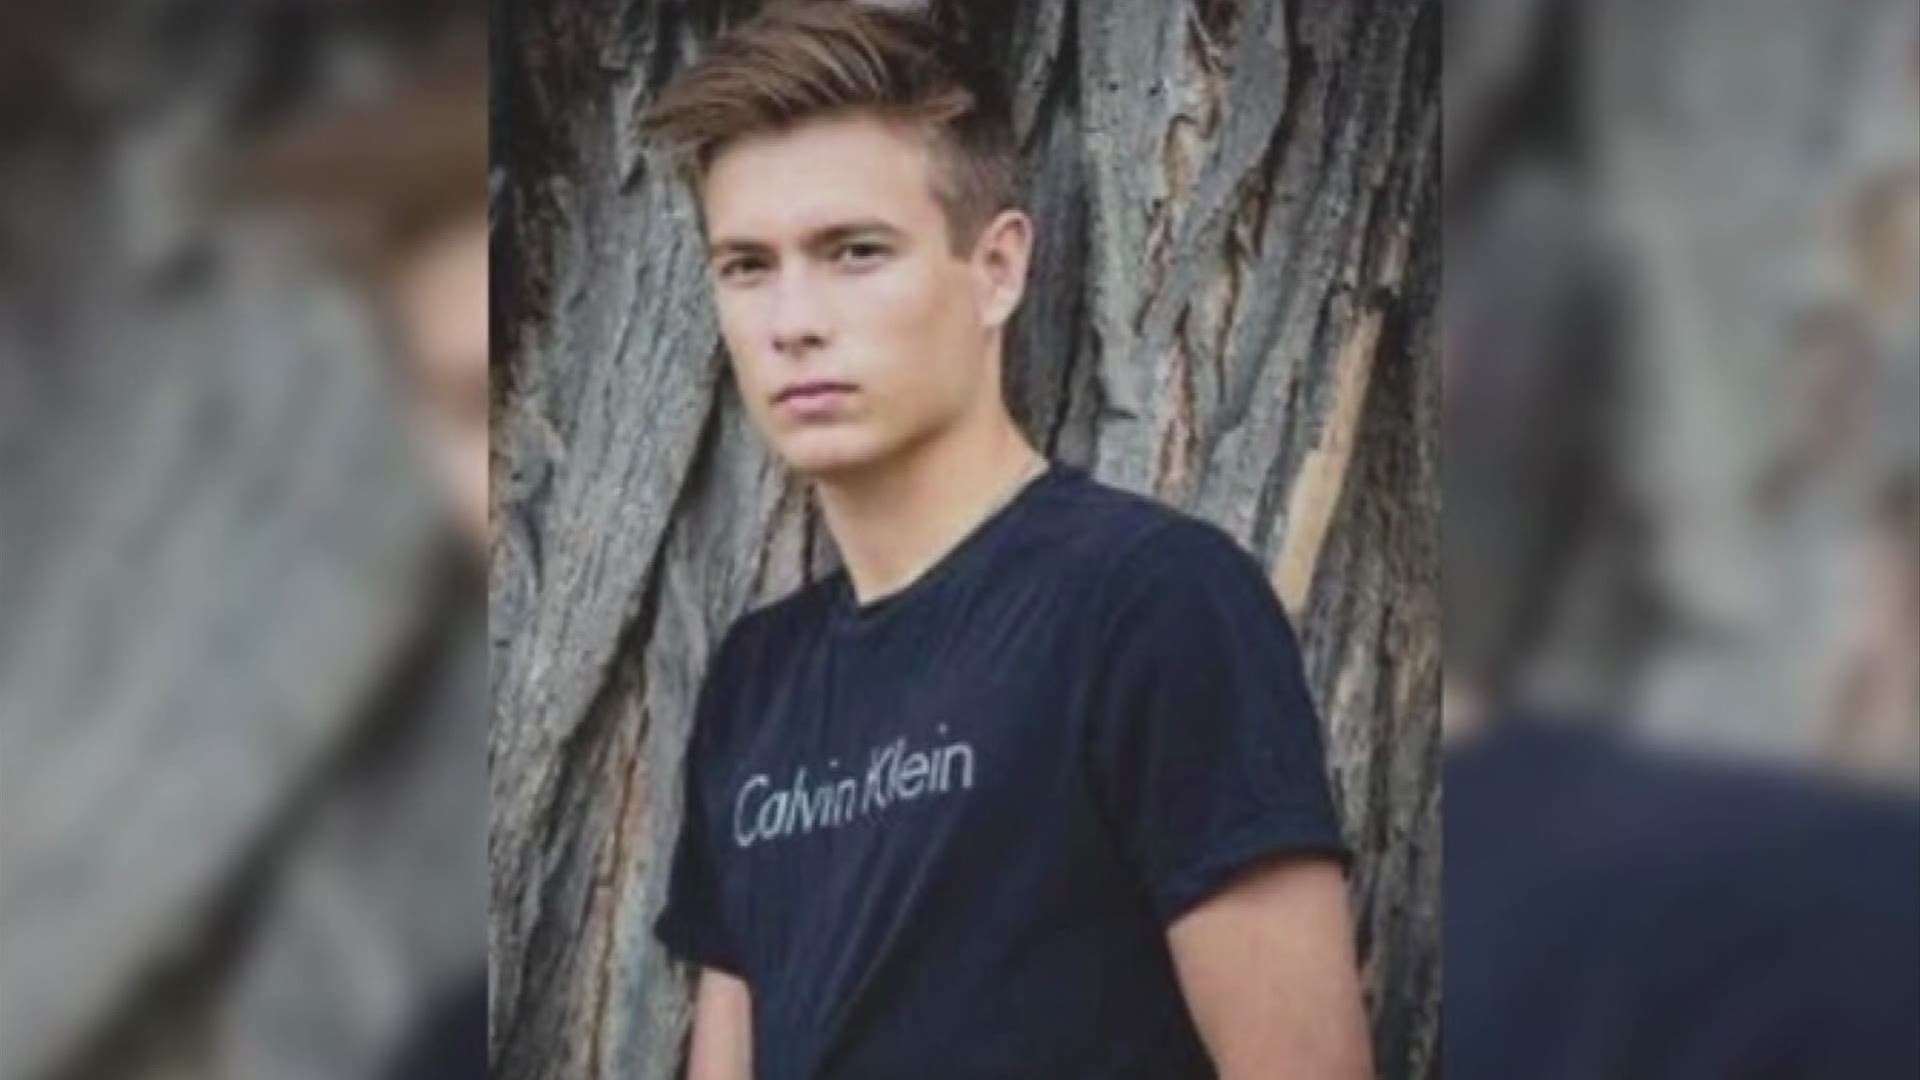 Stone Foltz died during an alleged hazing incident at a fraternity.